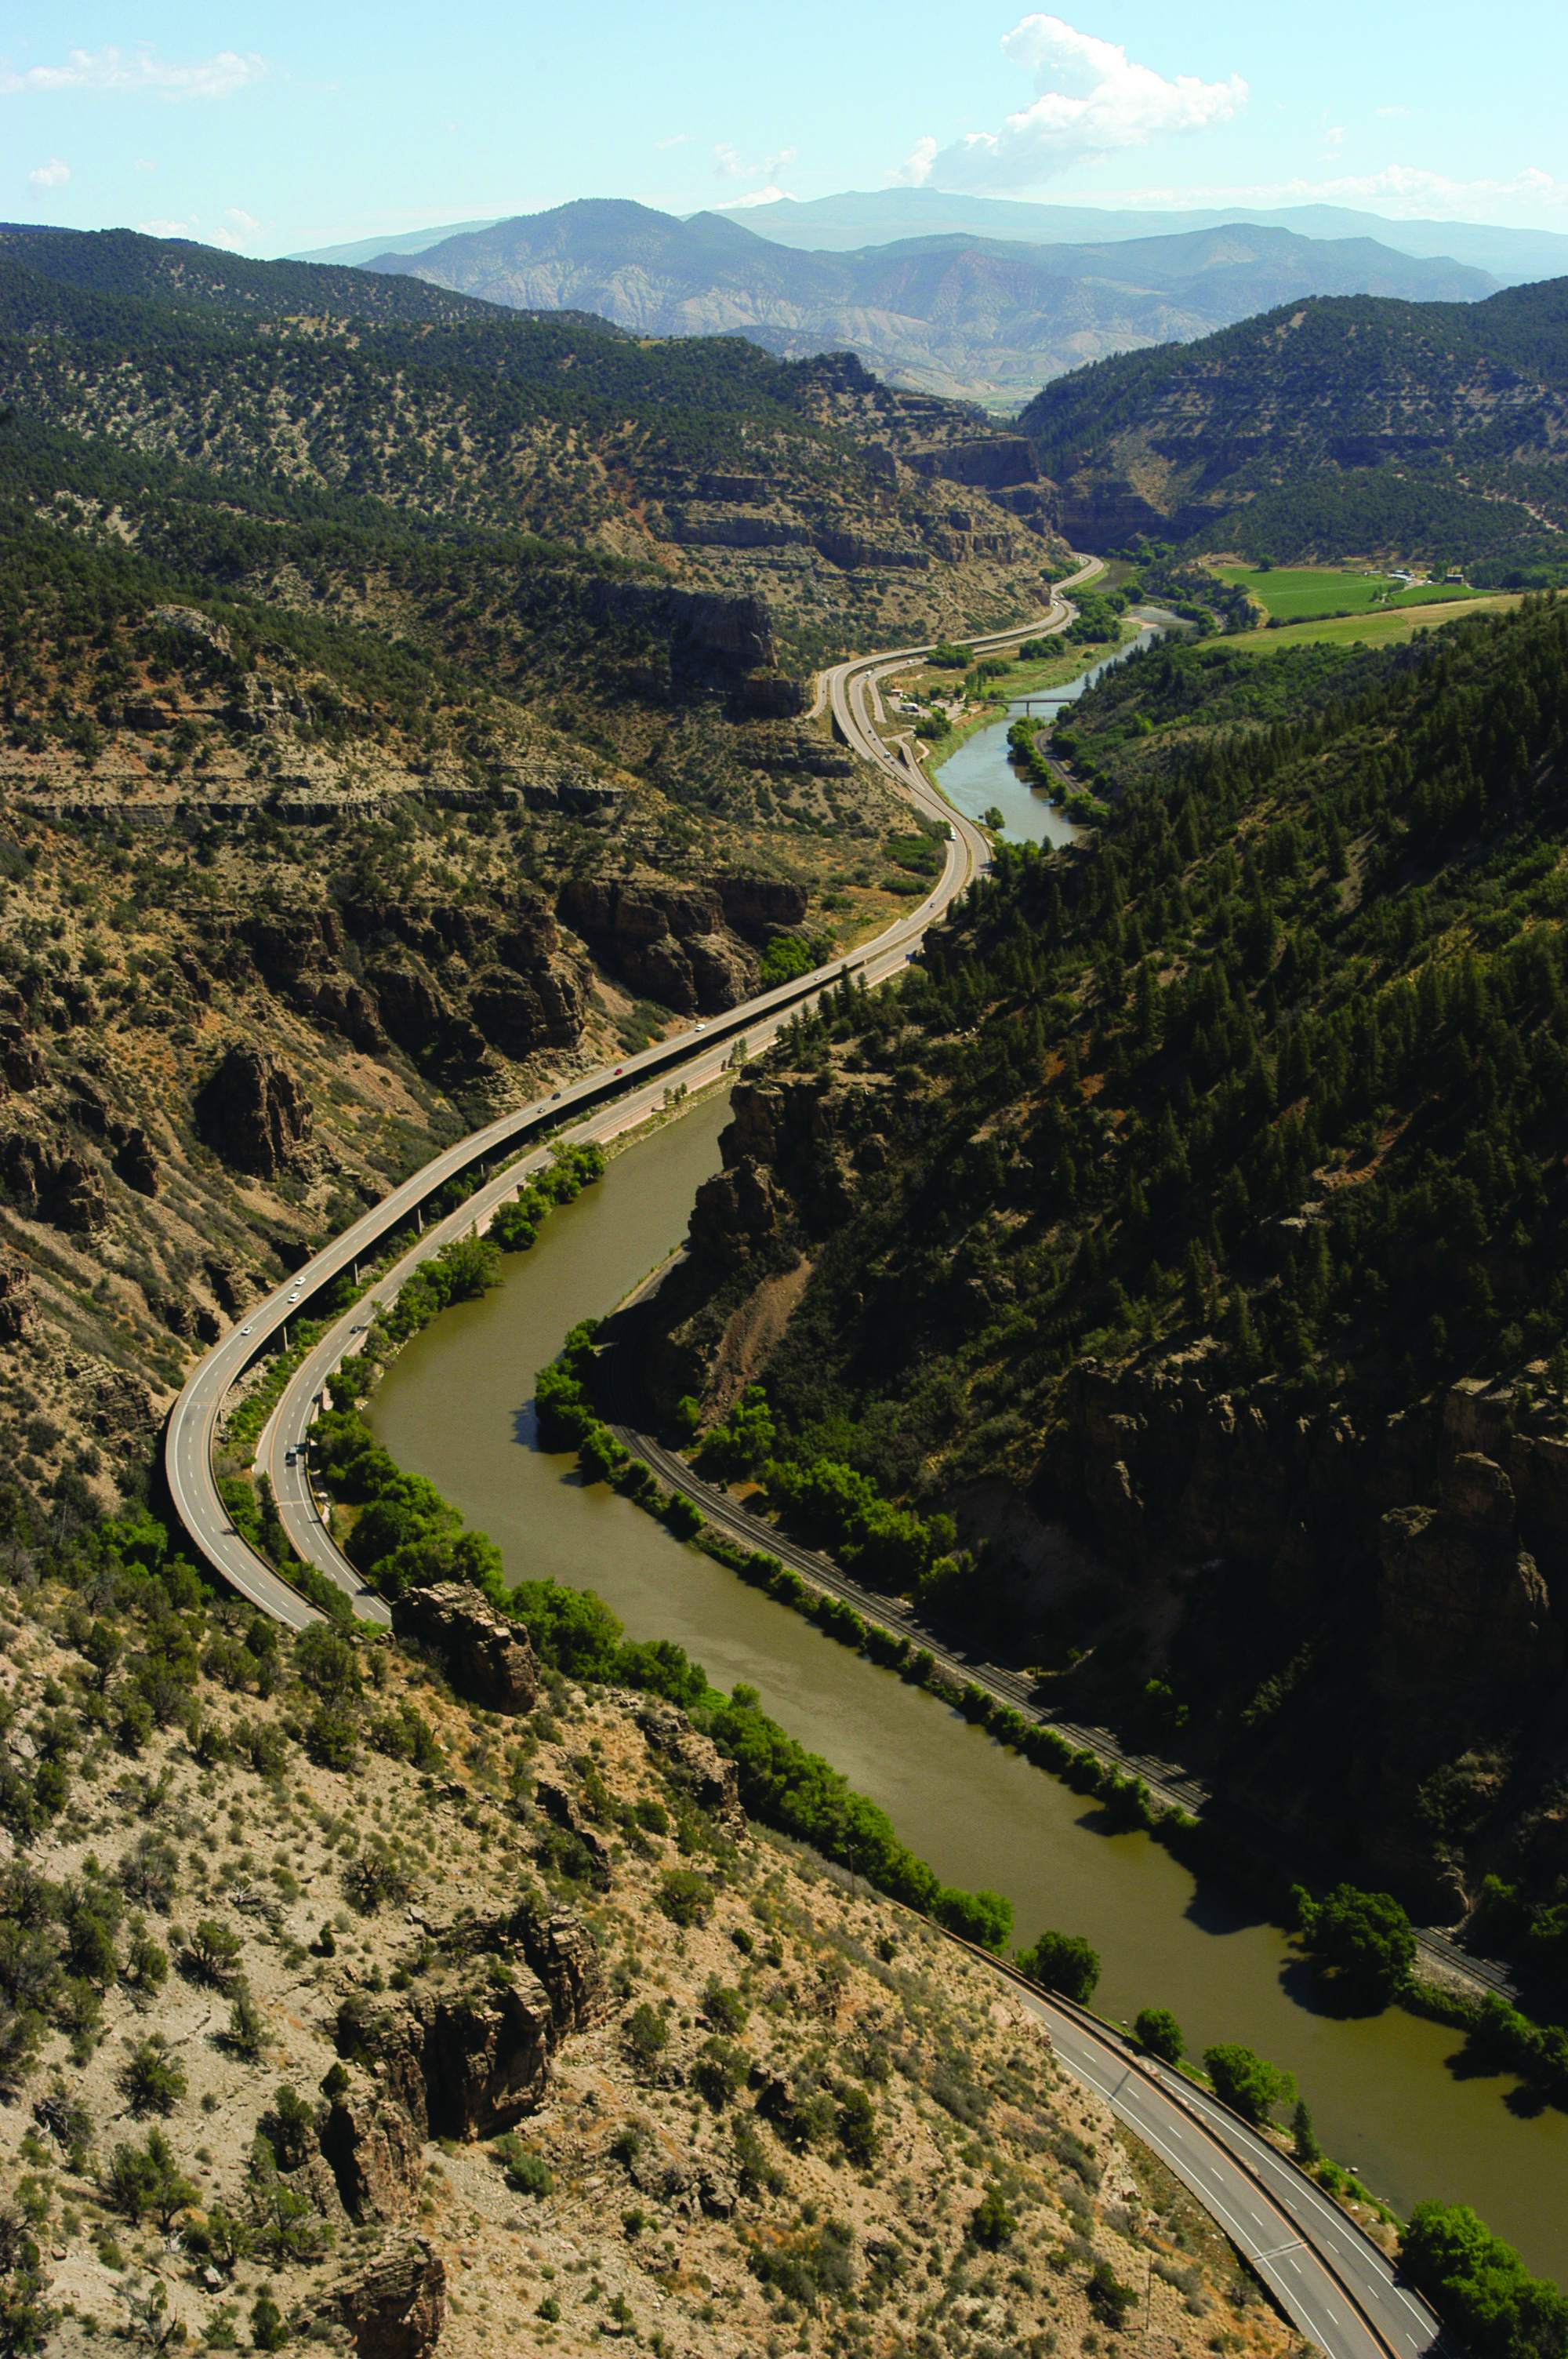 image of twisting highway through canyon